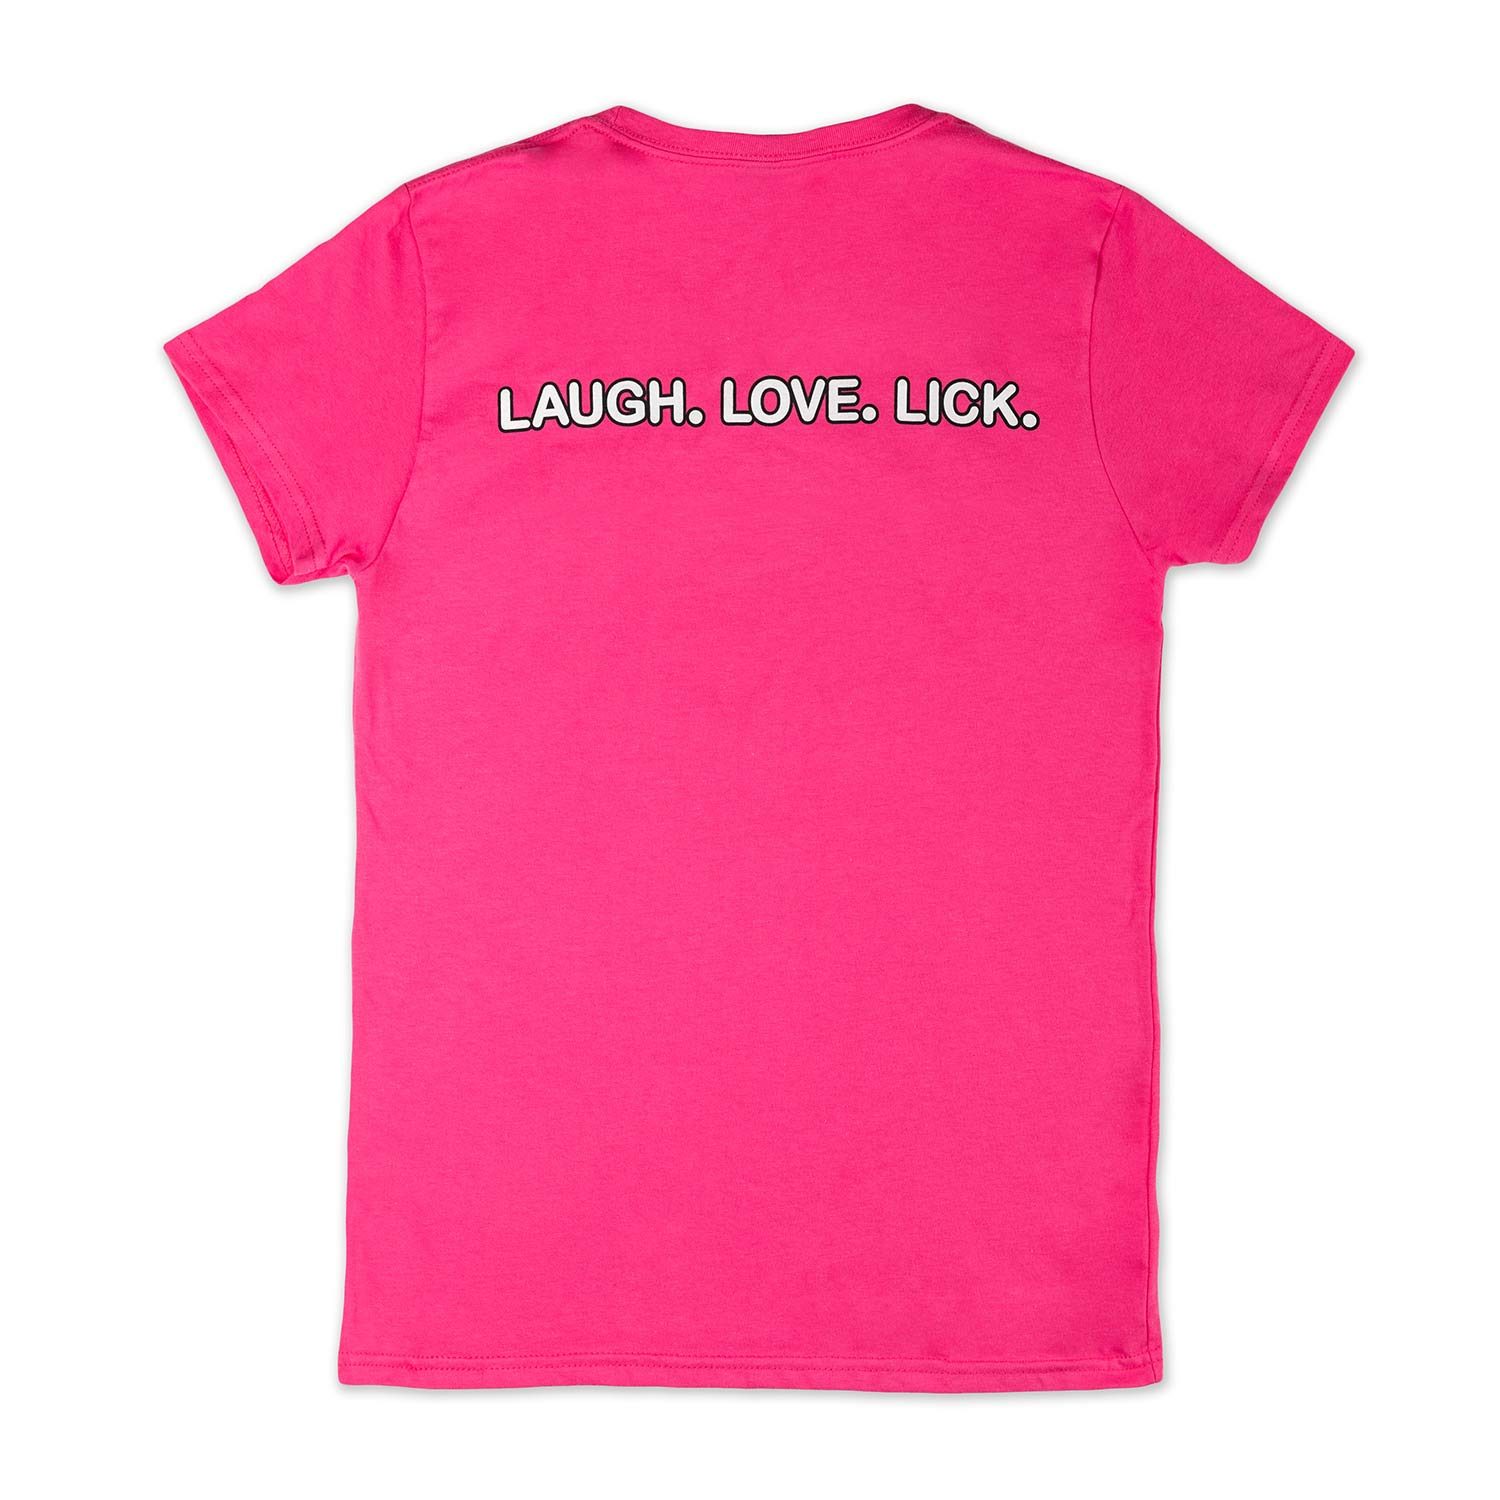 Love. Laugh. Lick. T (back) in hot pink by Beau Tyler